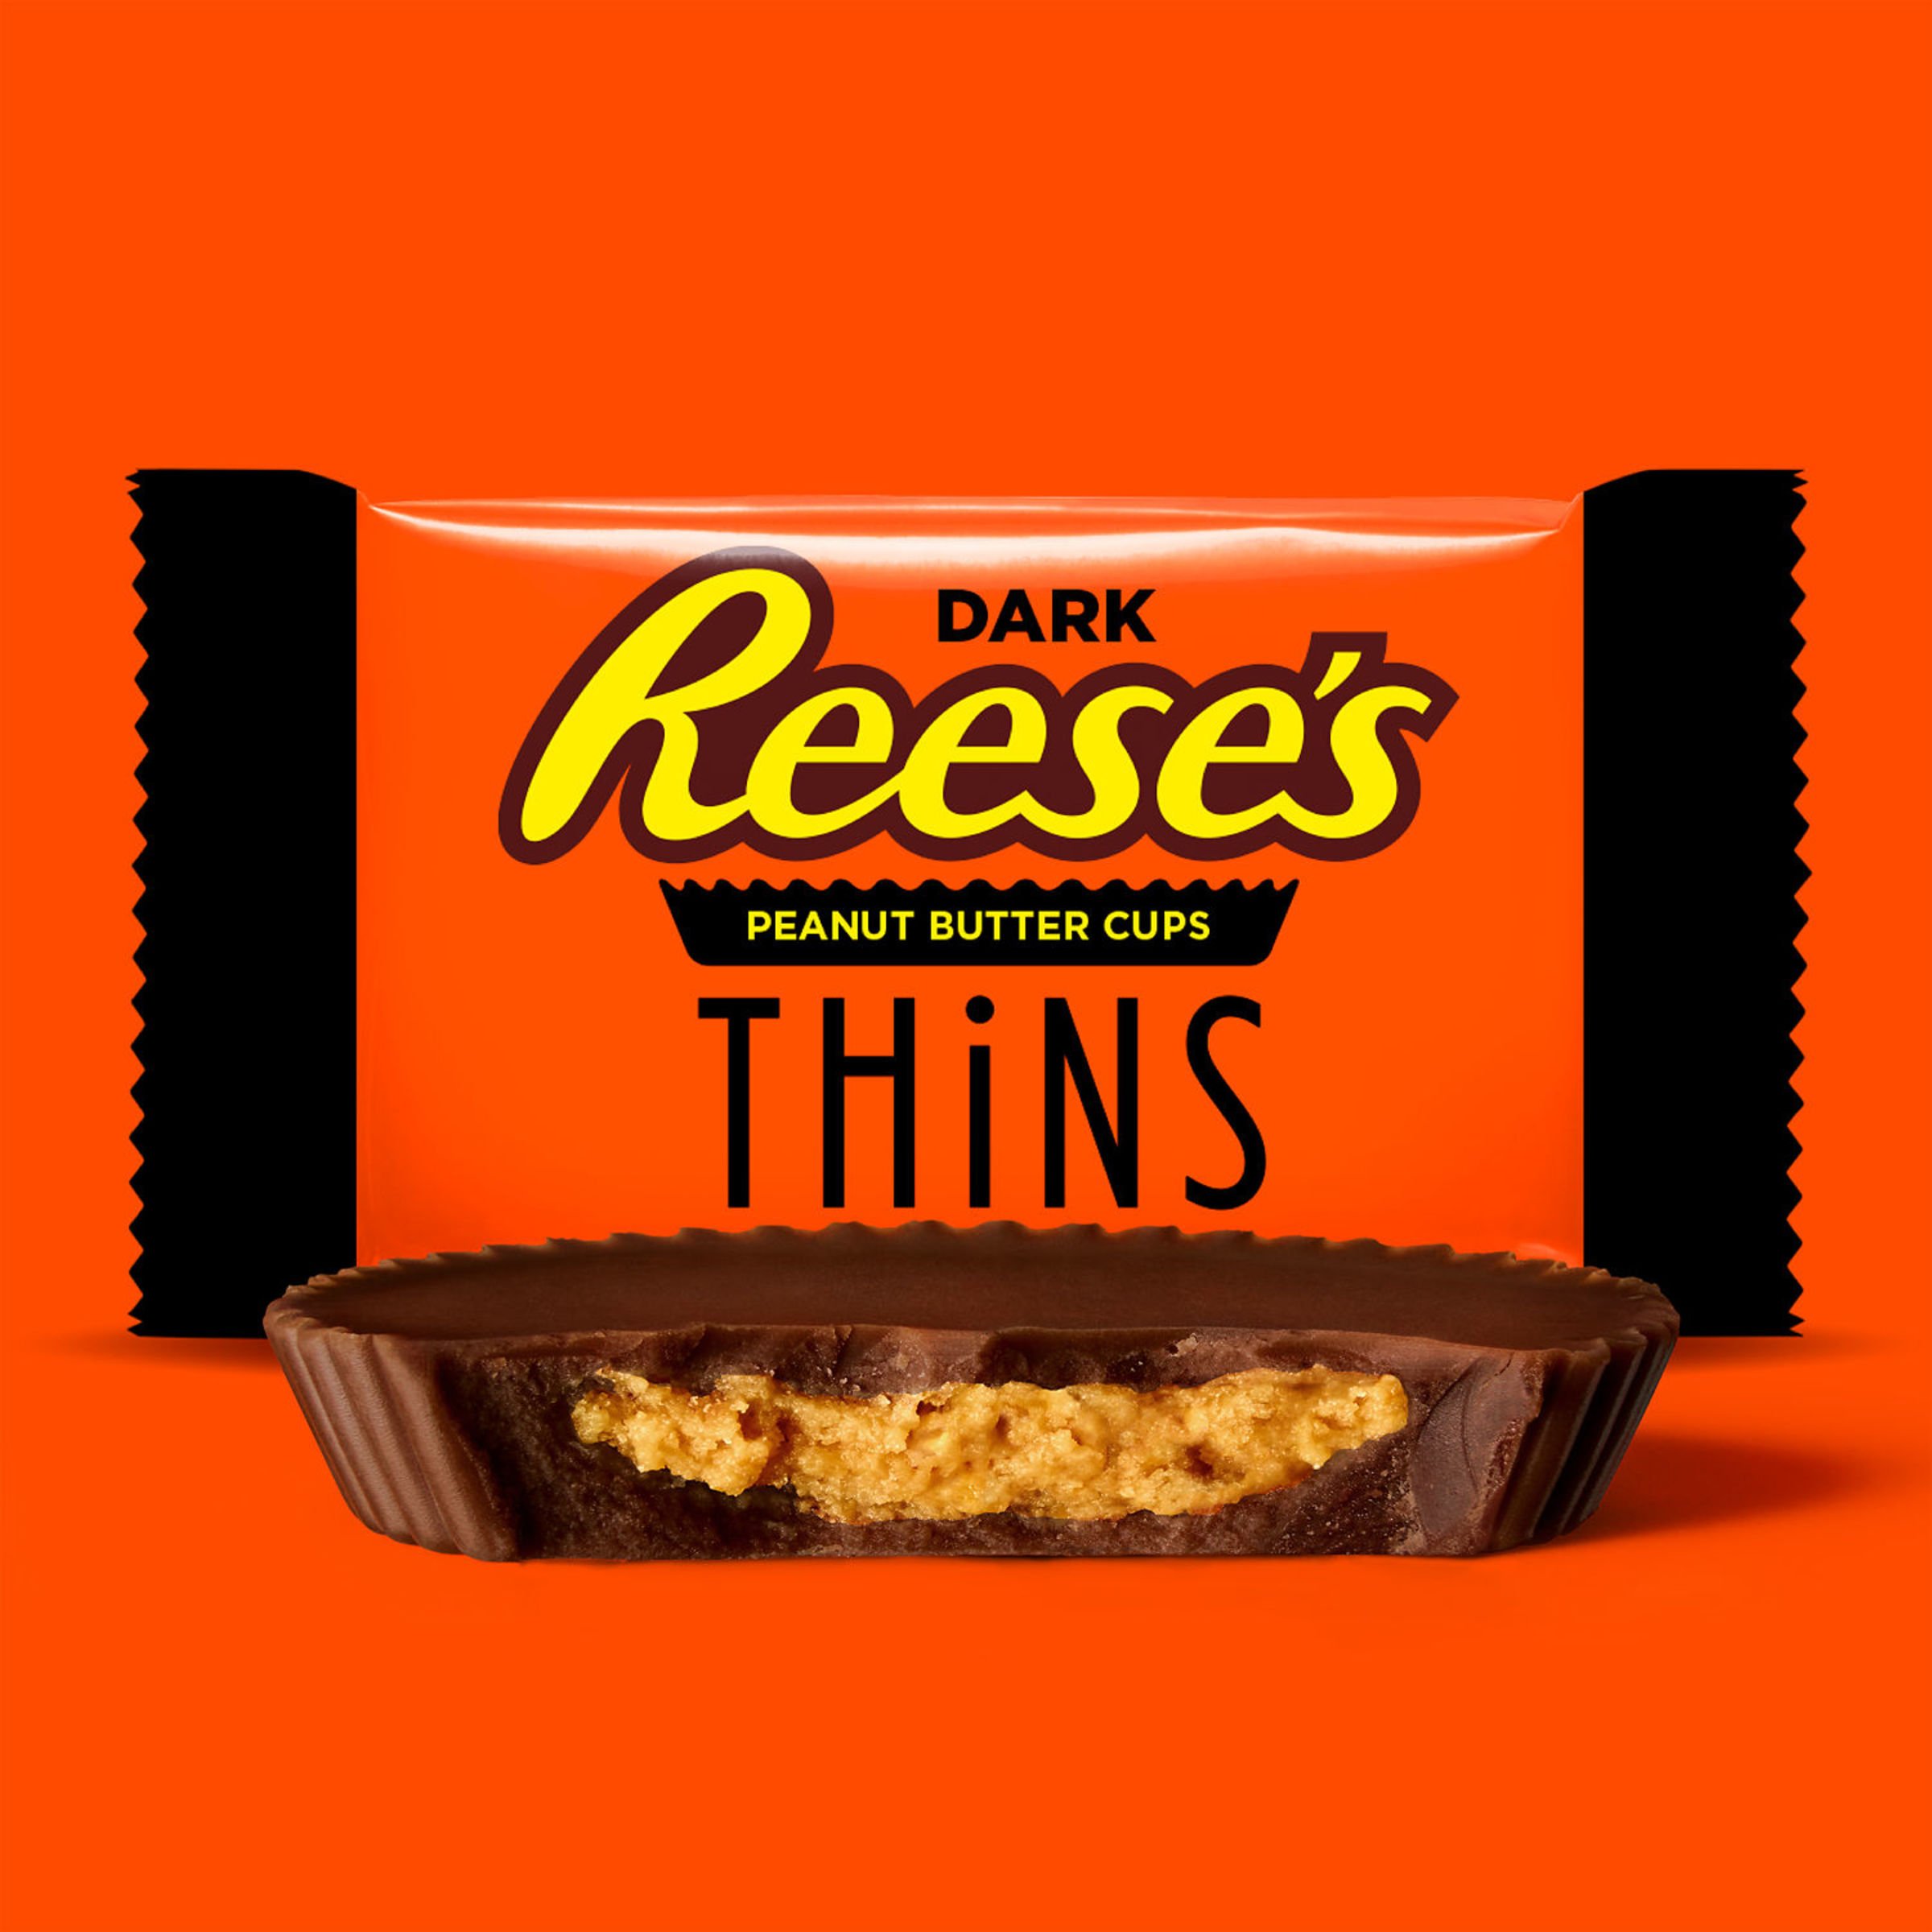 Reese's THiNS Peanut Butter Cups Candy - Share Pack - Shop Candy at H-E-B